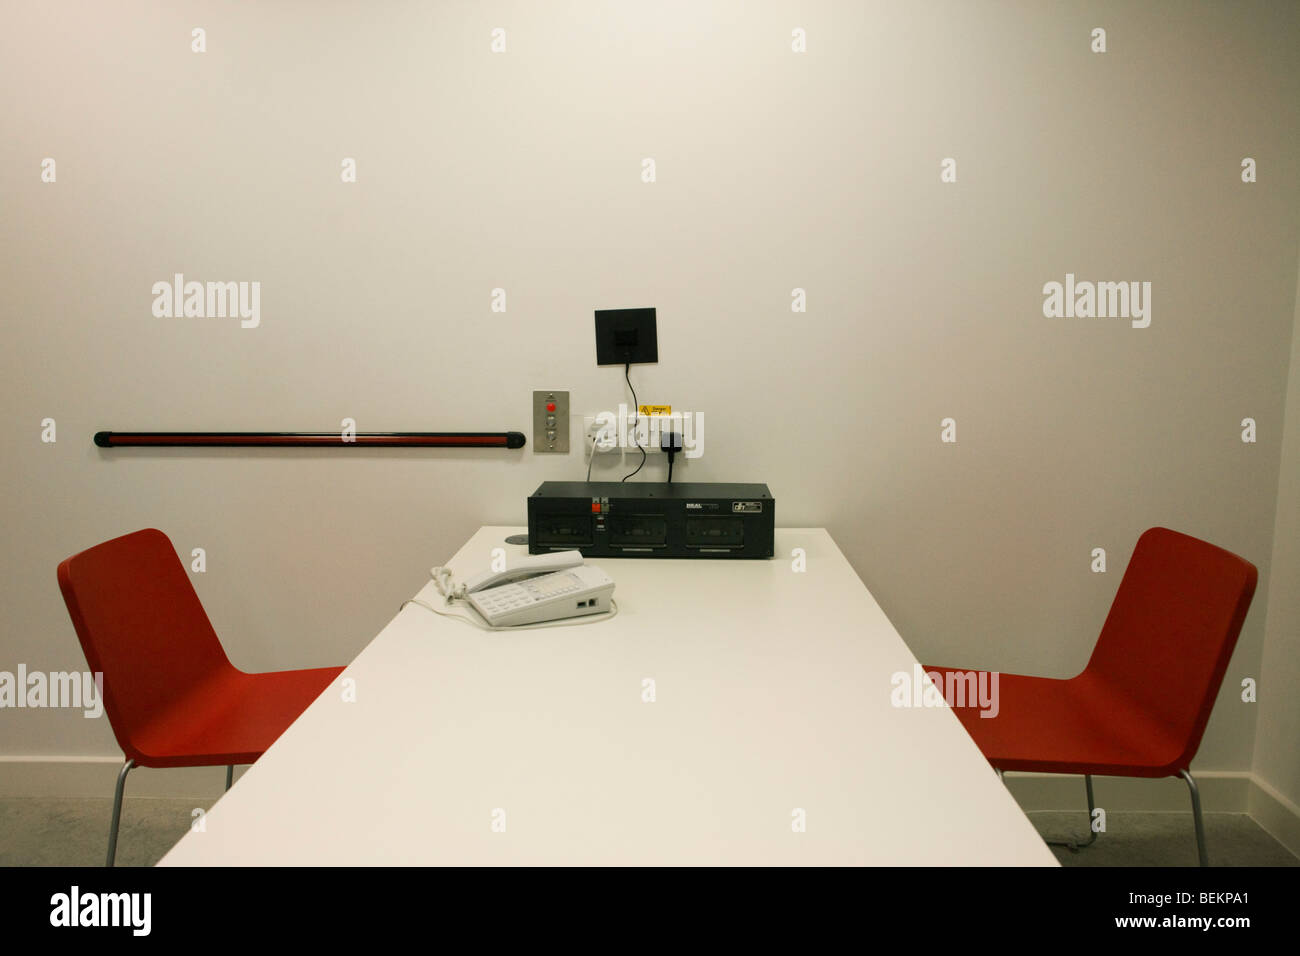 The UK Border Agency's immigration detention room at Heathrow Airport's Terminal 5. Stock Photo